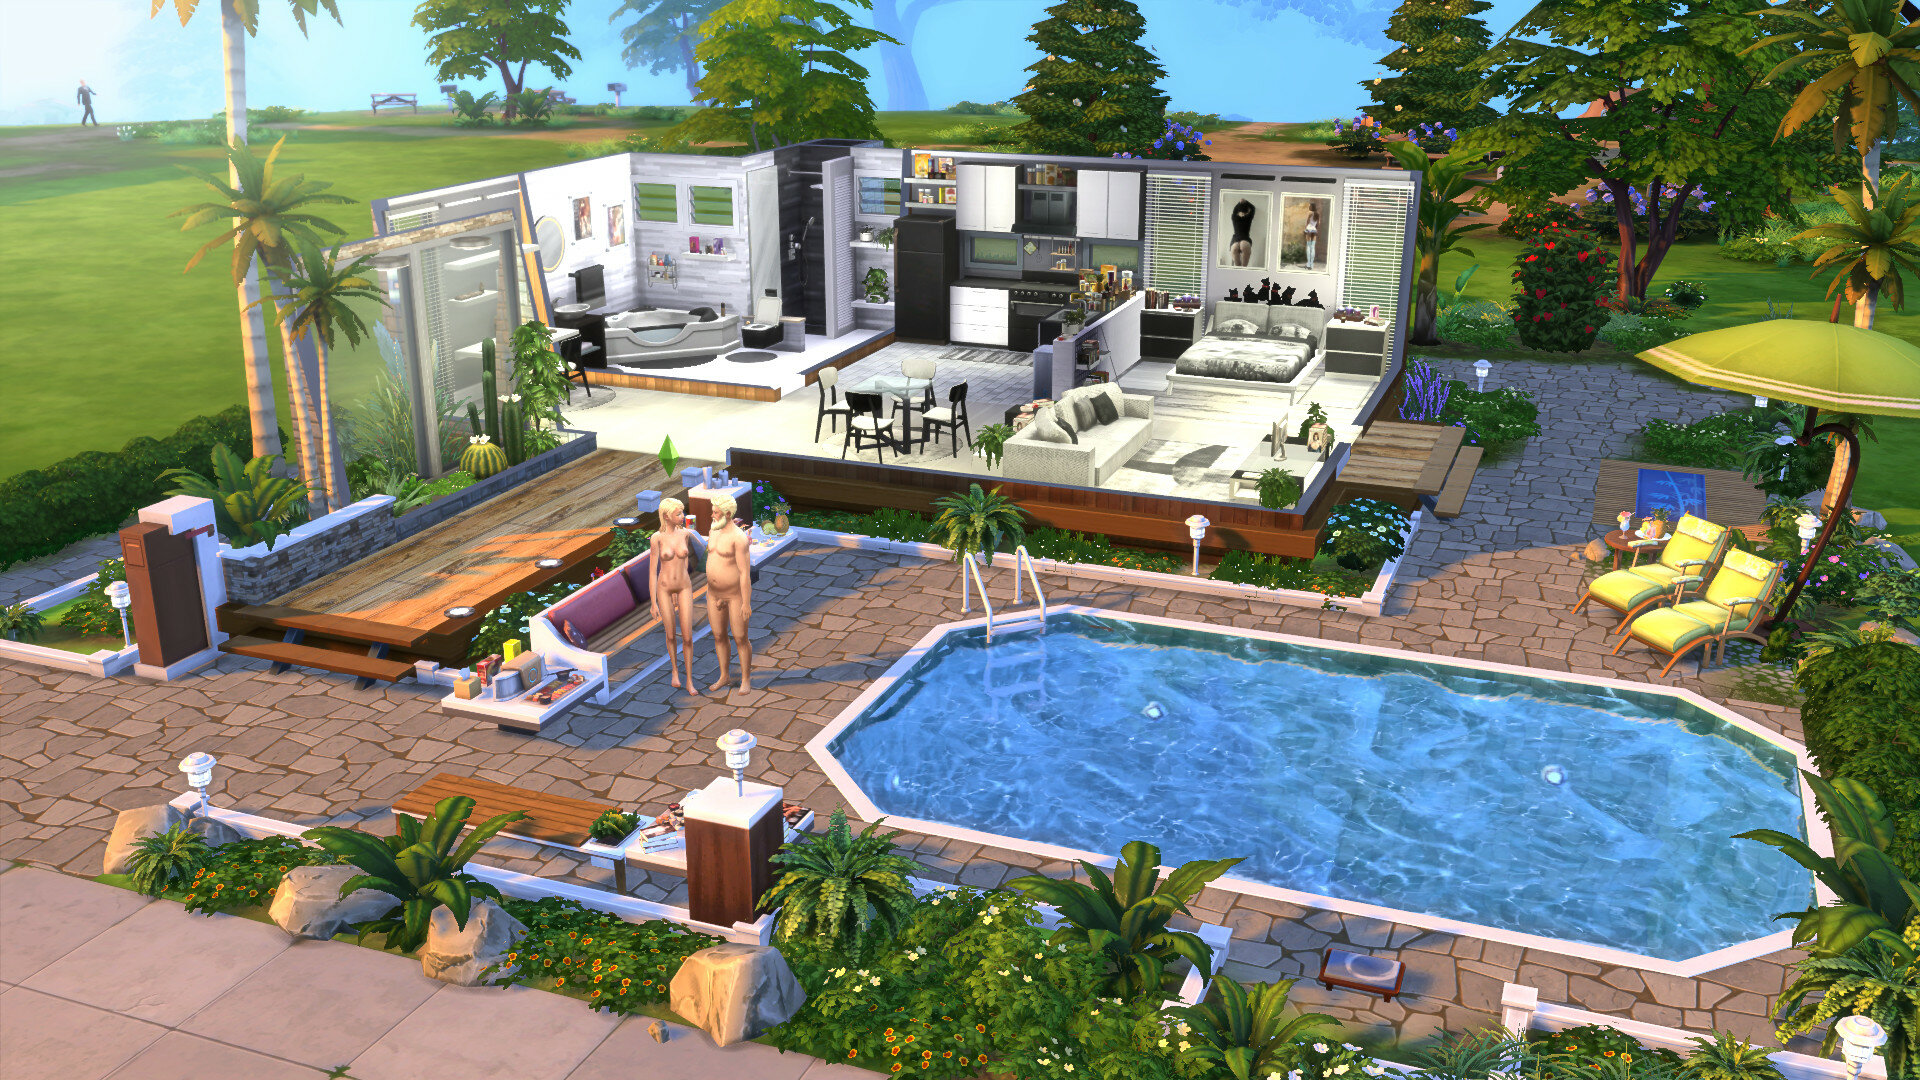 some ideas to build houses - Sims 4 Graphic - LoversLab